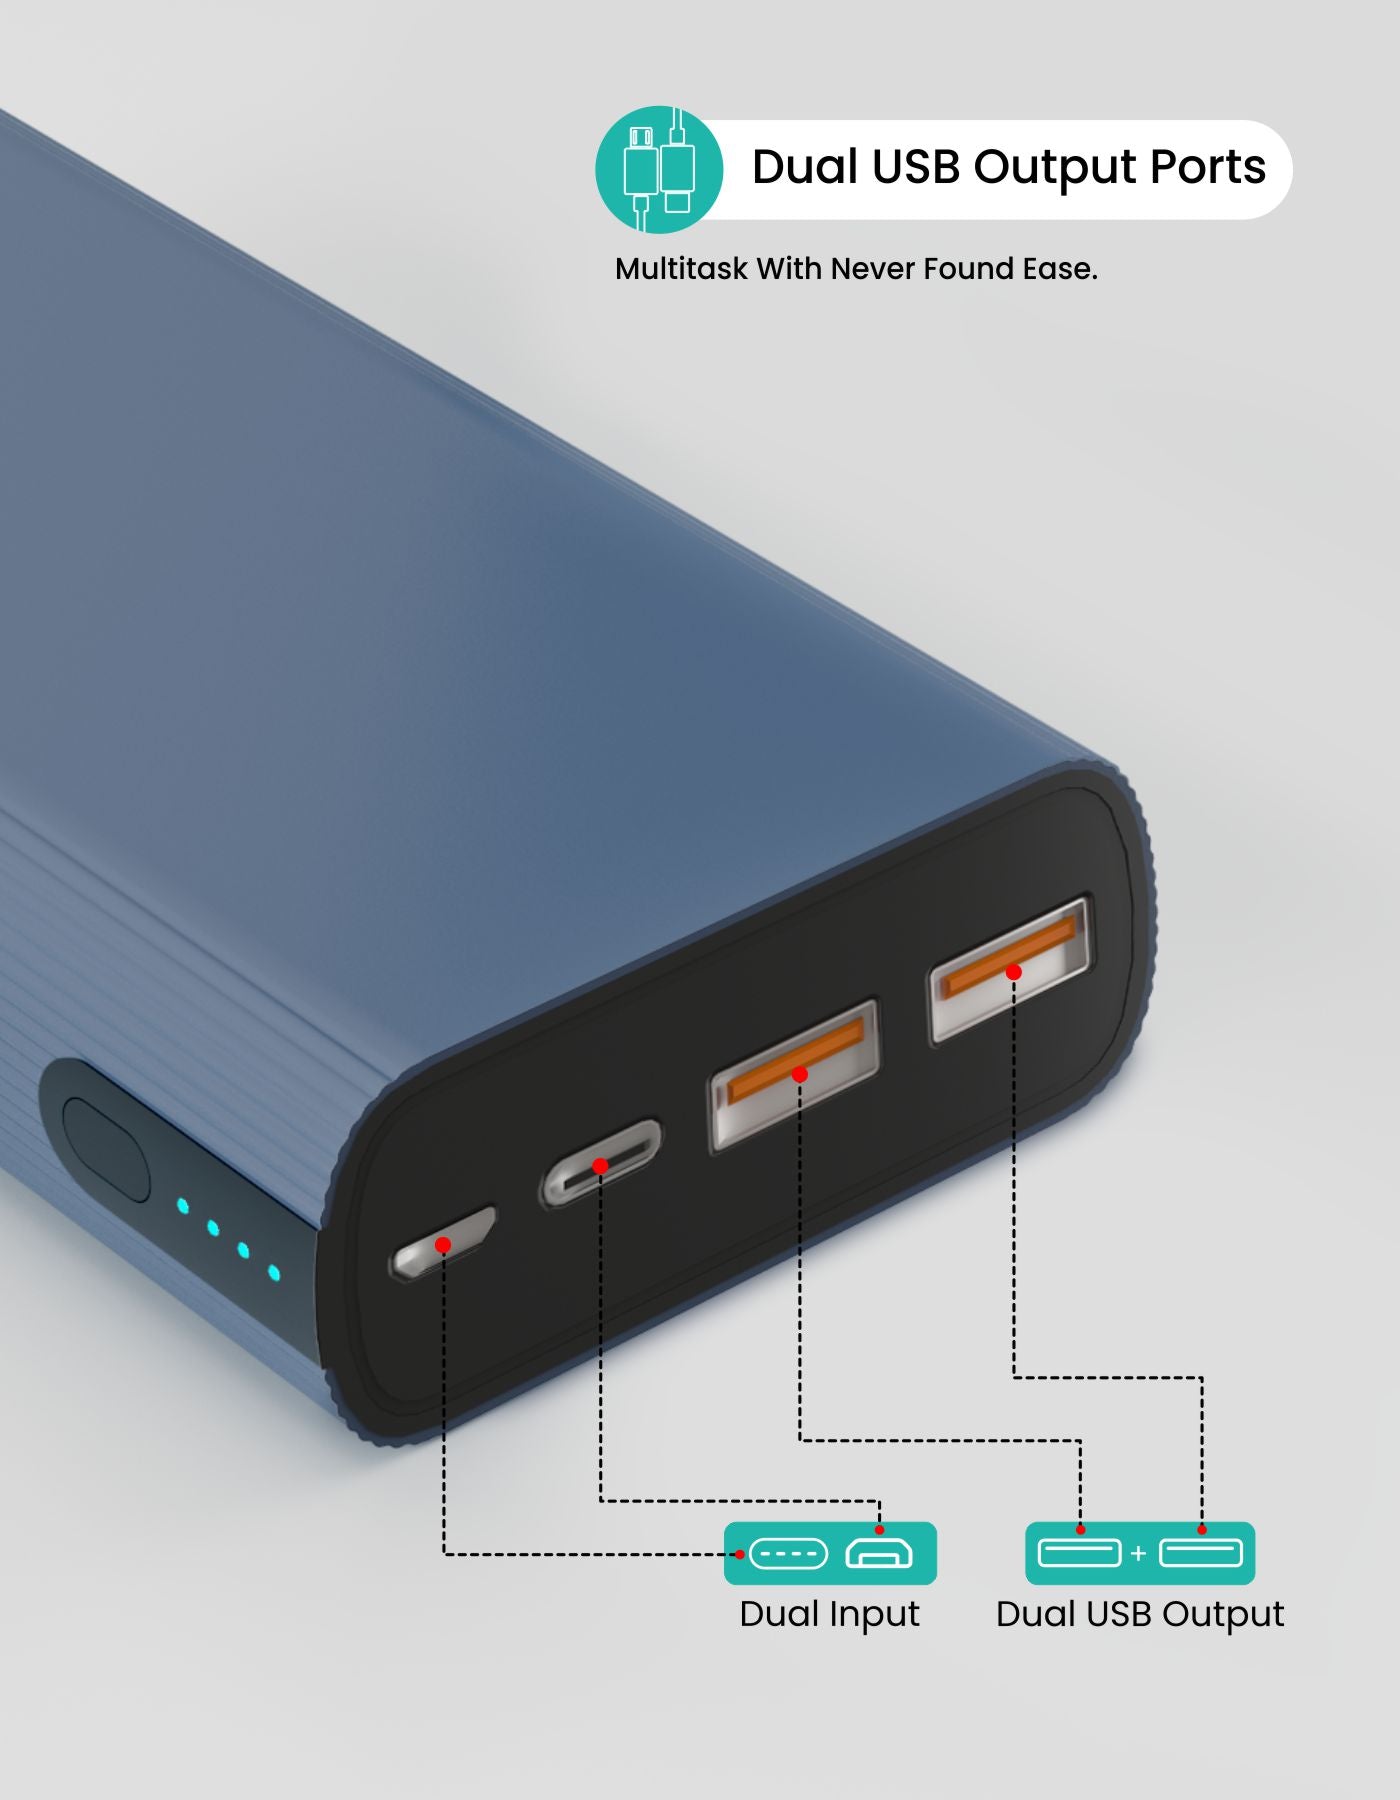 Portronics POWER 45 Power bank 20000mah 45W PD output Fast Charge with dual USB output ports